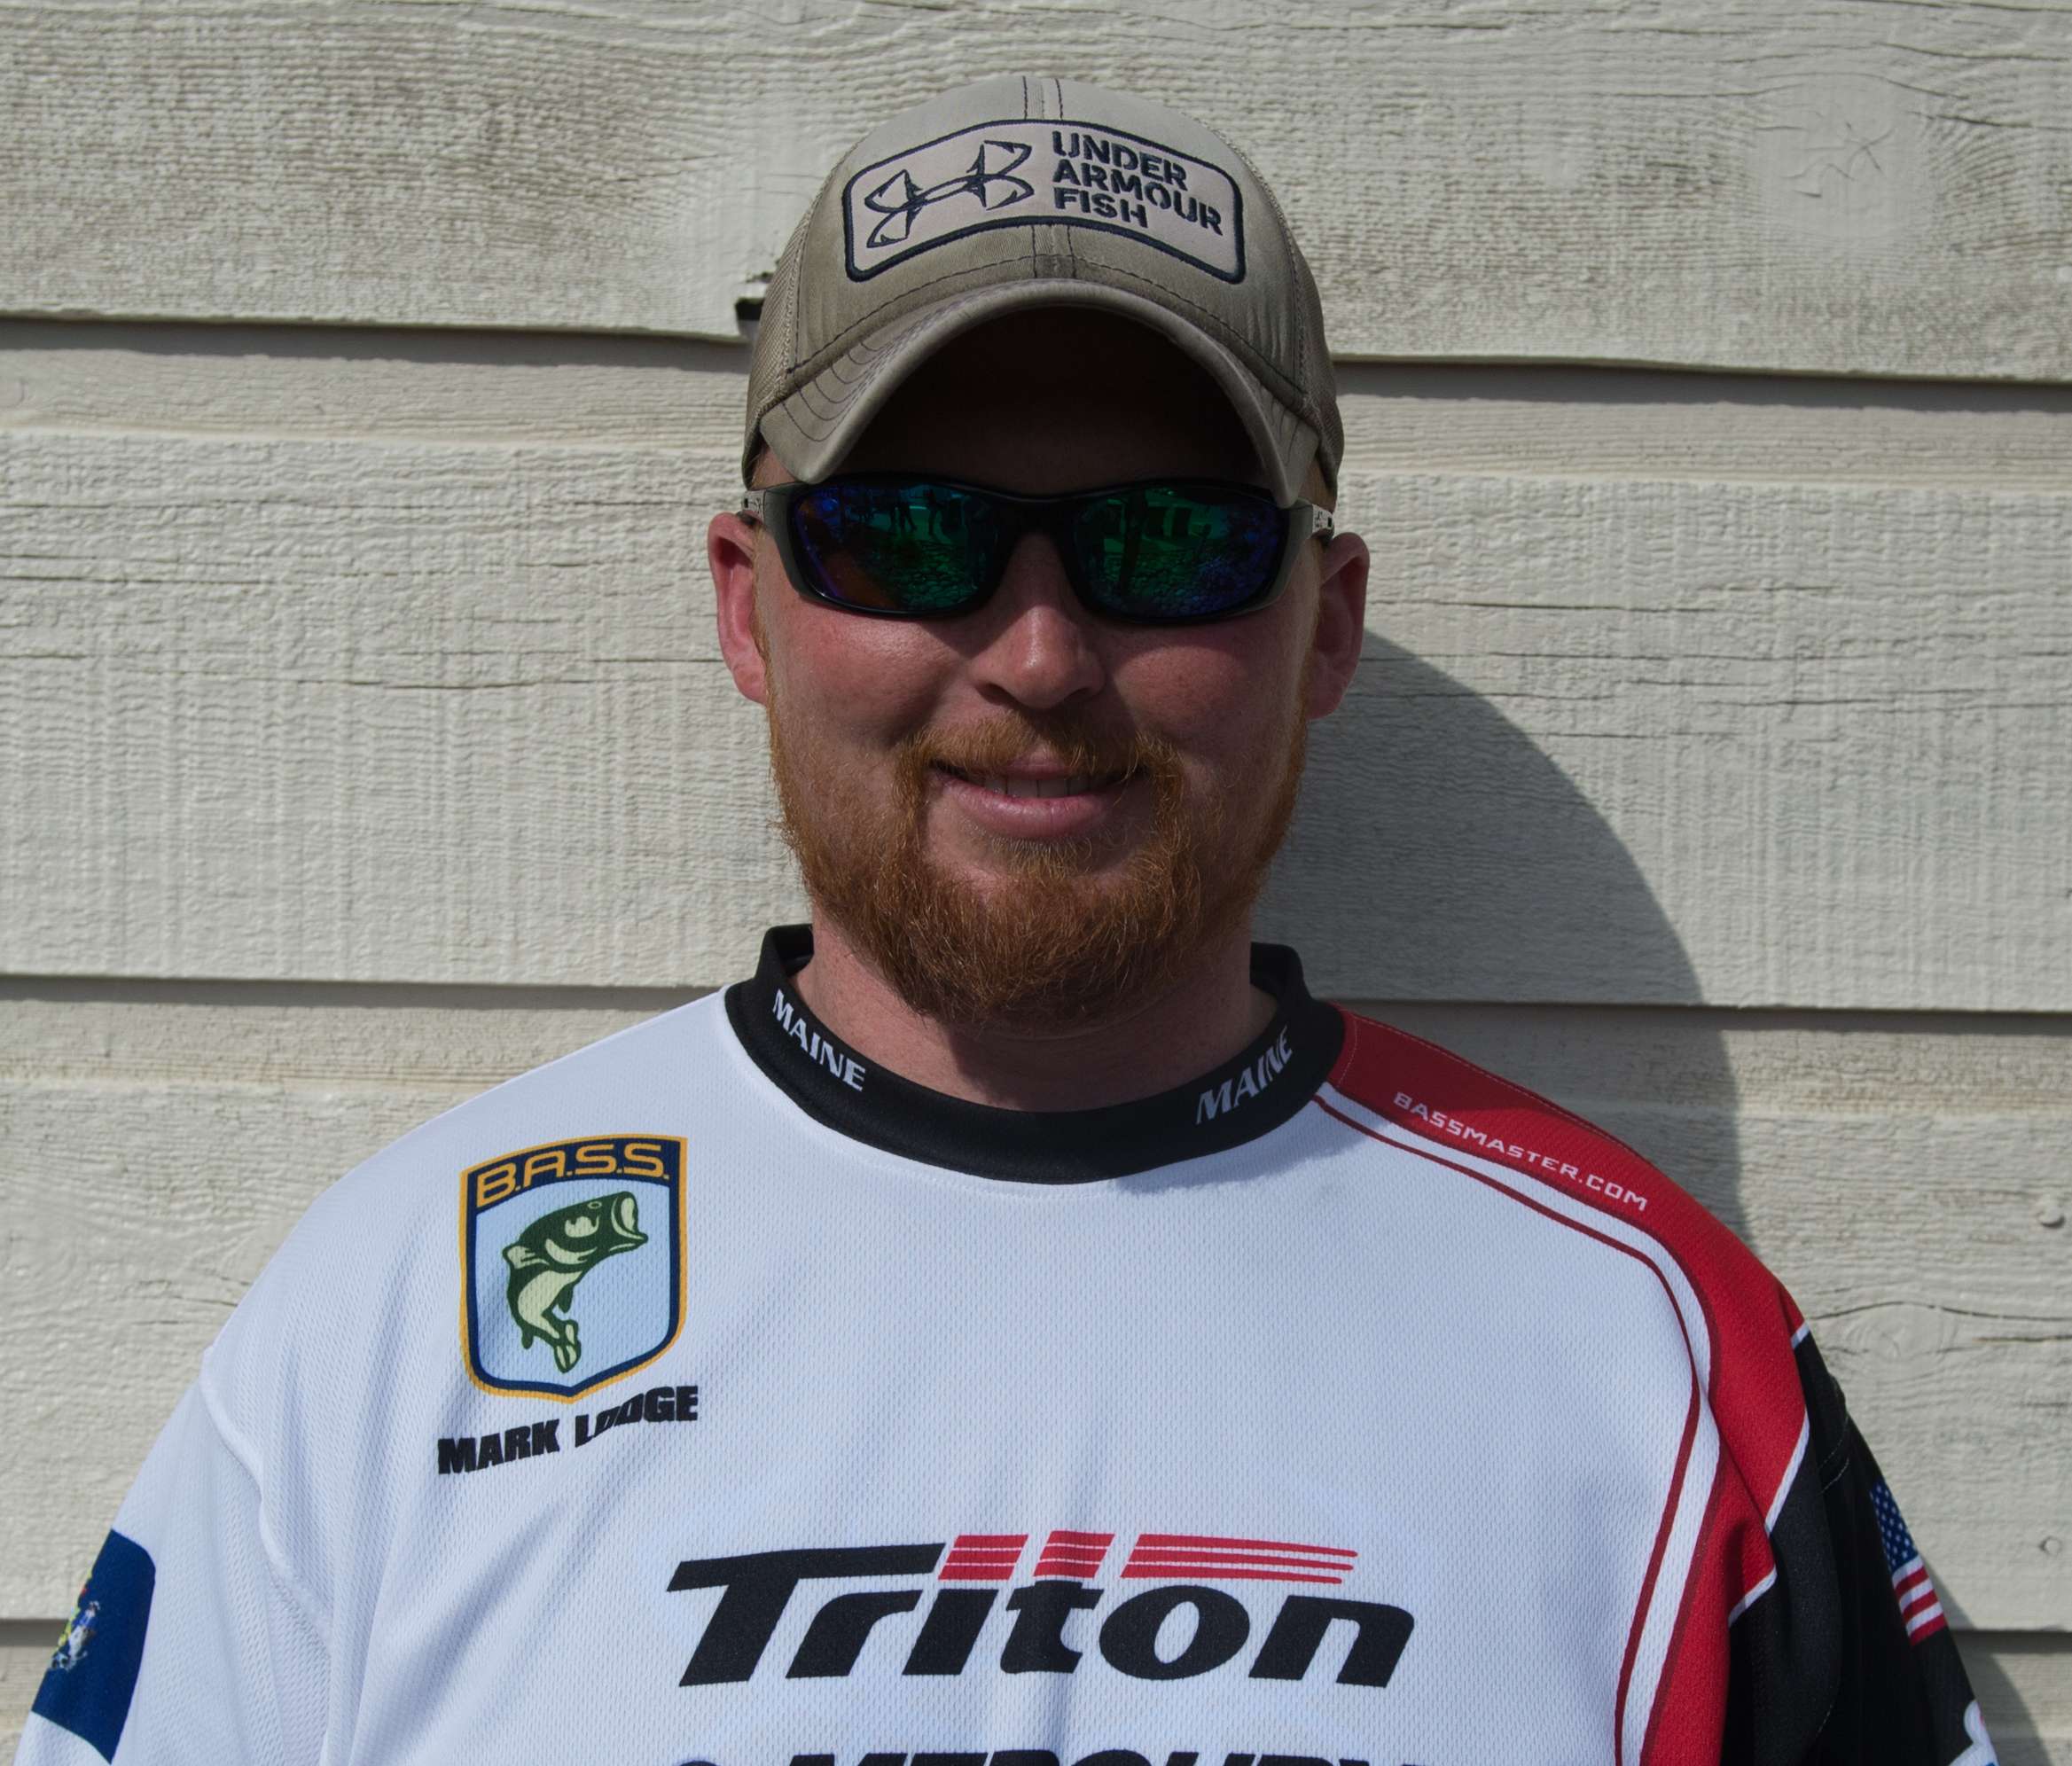 Mark Lodge <br>
Maine Boater <br>
Mark Lodge, a member of the Southern Maine Anglers, works as a land surveyor. This championship will be his first. He likes hockey, hunting, ice fishing and snowmobiling. Lodge is sponsored by his family and friends. 